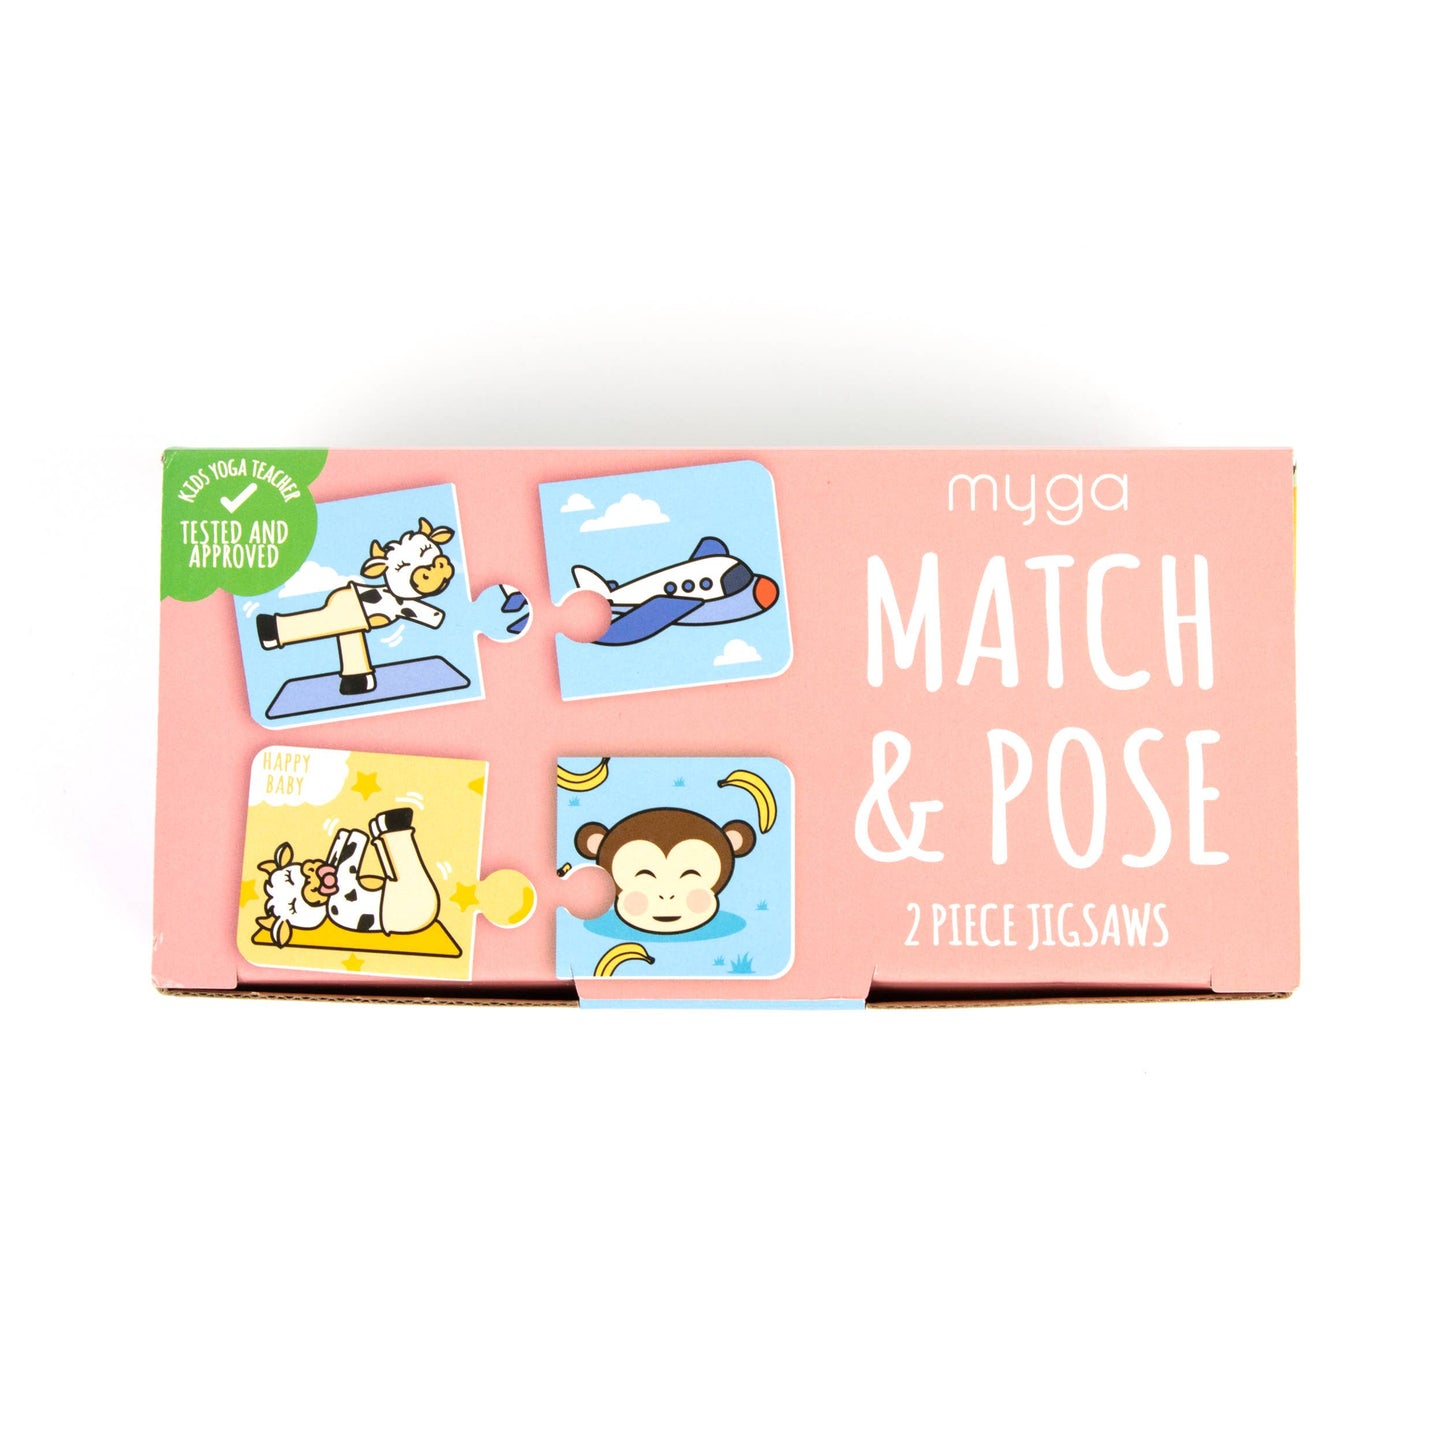 Match & Pose Two Piece Jigsaw Cards Yoga gift